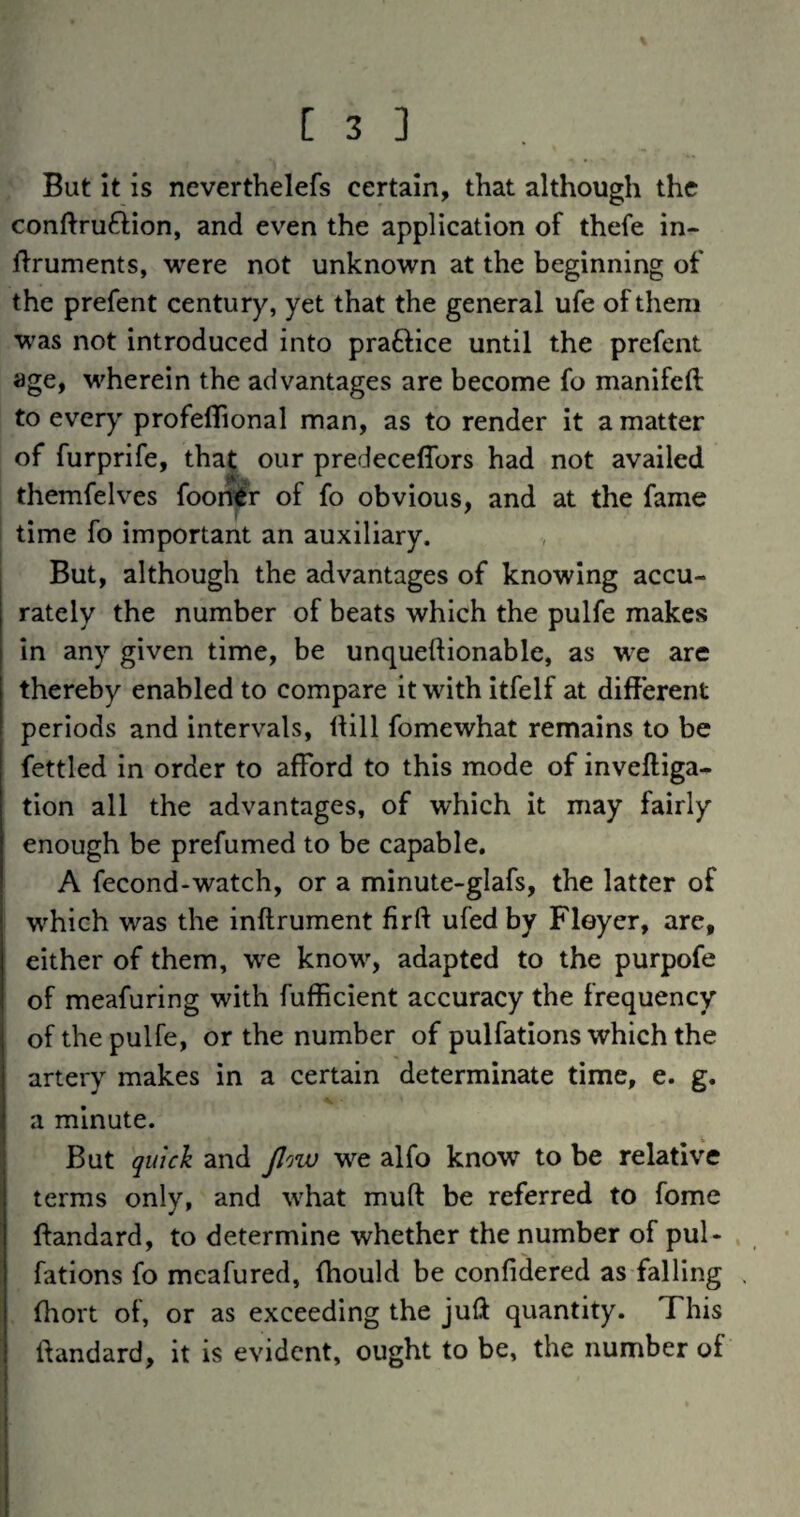 But it is neverthelefs certain, that although the conftruftion, and even the application of thefe in- ffruments, were not unknown at the beginning of the prefent century, yet that the general ufe of them was not introduced into practice until the prefent age, wherein the advantages are become fo manifcft to every profeflional man, as to render it a matter of furprife, that our predeceffors had not availed themfelves foorrfr of fo obvious, and at the fame time fo important an auxiliary. But, although the advantages of knowing accu¬ rately the number of beats which the pulfe makes in any given time, be unqueftionable, as we are thereby enabled to compare it with itfelf at different periods and intervals, iHll fomewhat remains to be fettled In order to afford to this mode of inveftiga- tion all the advantages, of which it may fairly enough be prefumed to be capable. A fecond-watch, or a minute-glafs, the latter of which was the inftrument fir ft ufed by Fleyer, are, either of them, we know, adapted to the purpofe of meafuring with fufficient accuracy the frequency of the pulfe, or the number of pulfations which the artery makes in a certain determinate time, e. g. a minute. But quick and Jlow we alfo know to be relative terms only, and what muft be referred to fome ftandard, to determine whether the number of pul- . fatlons fo meafured, (hould be confidered as falling . ftiort of, or as exceeding the juft quantity. This ftandard, it is evident, ought to be, the number of